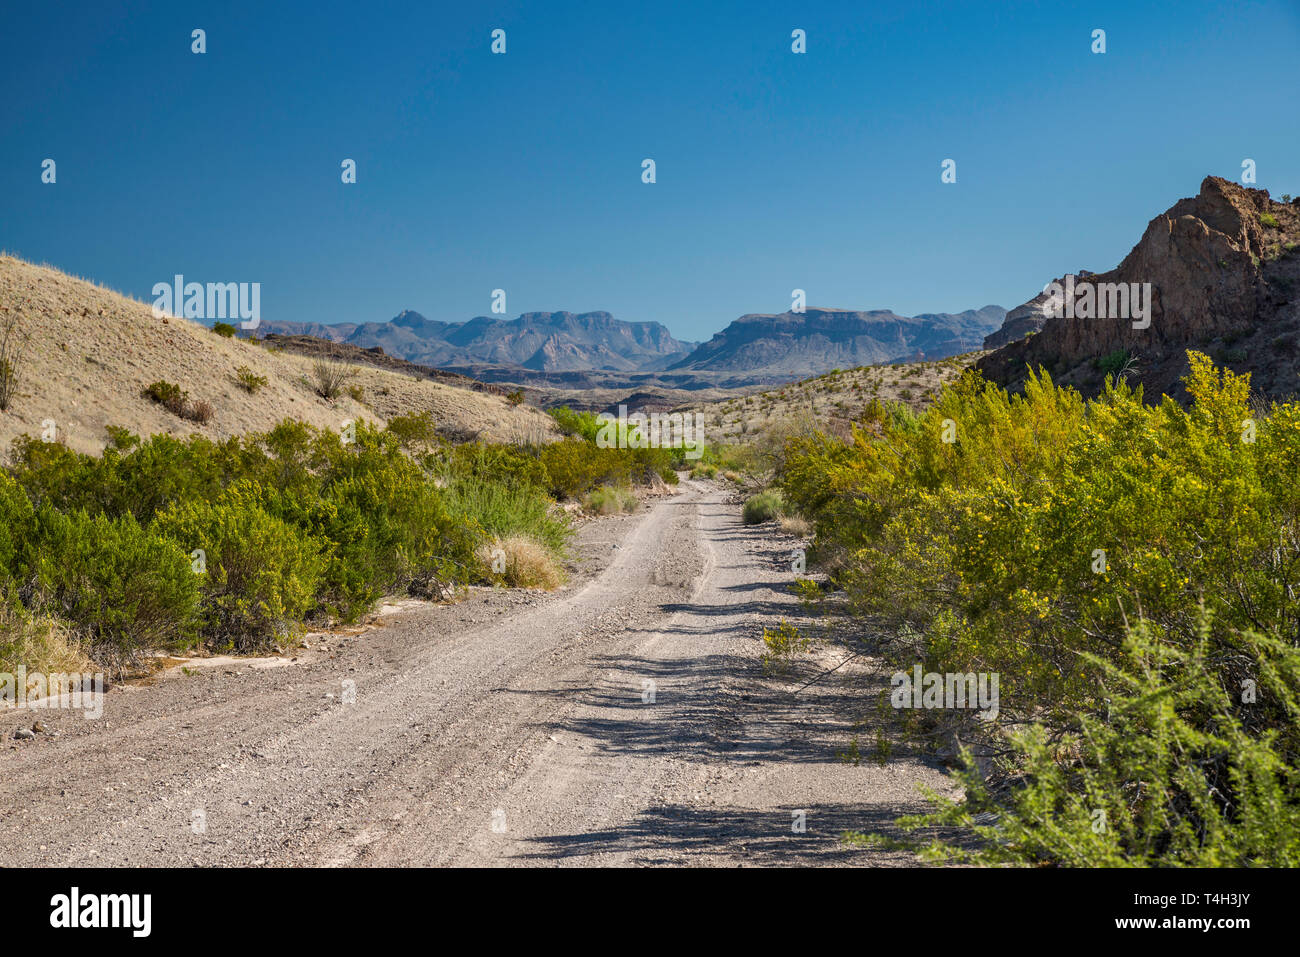 River Road, Chisos Mountains in distance, Chihuahuan Desert borderland, Big Bend National Park, Texas, USA Stock Photo